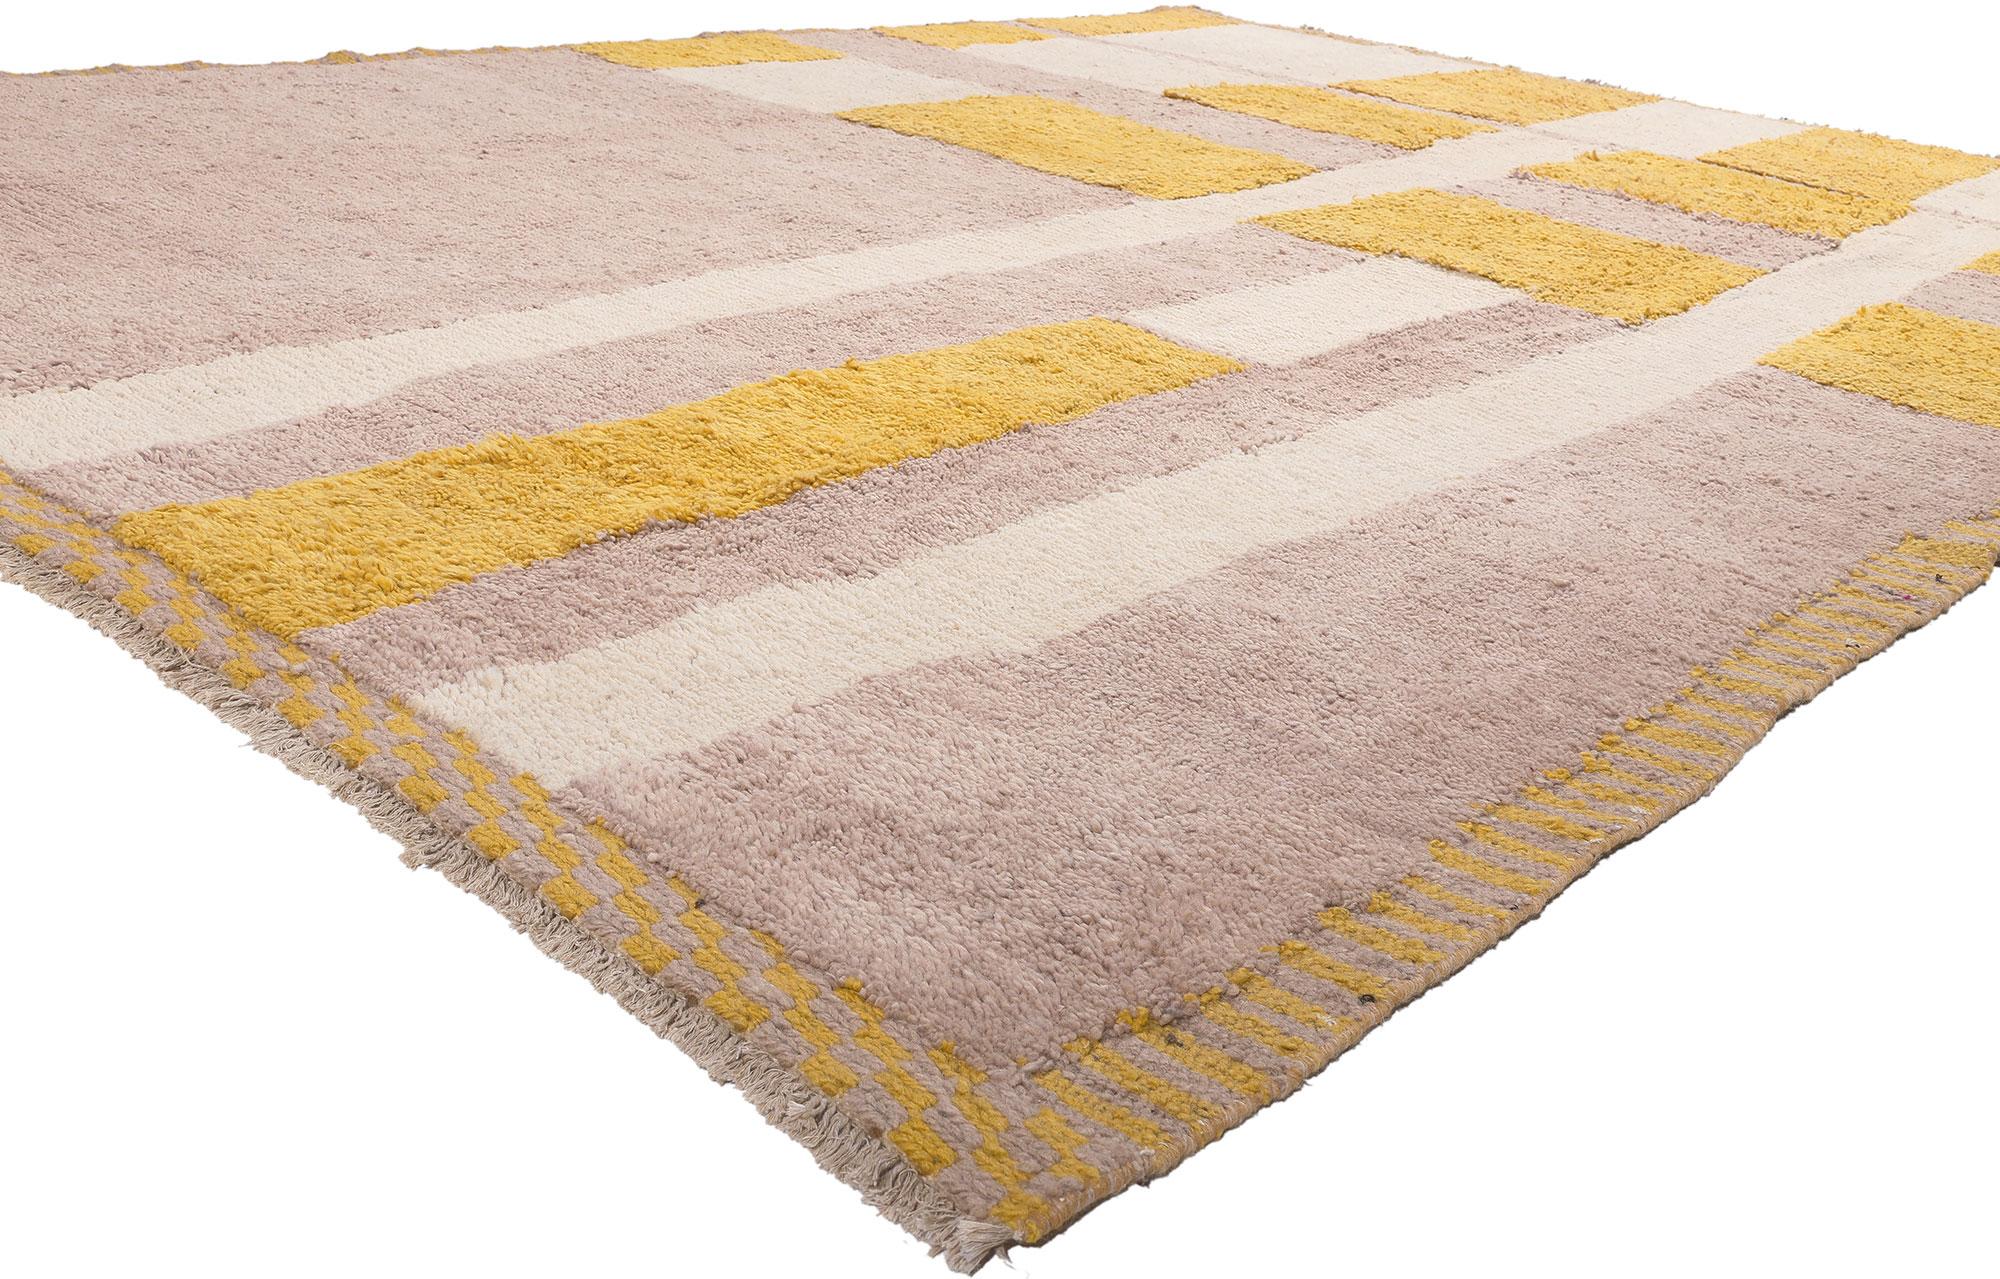 81014 Modern Color Block Moroccan Rug, 08'11 x 11'10. Reflecting elements of Abstract Expressionism with incredible detail and texture, this modern Moroccan area rug is a captivating vision of woven beauty. The eye-catching color block pattern and